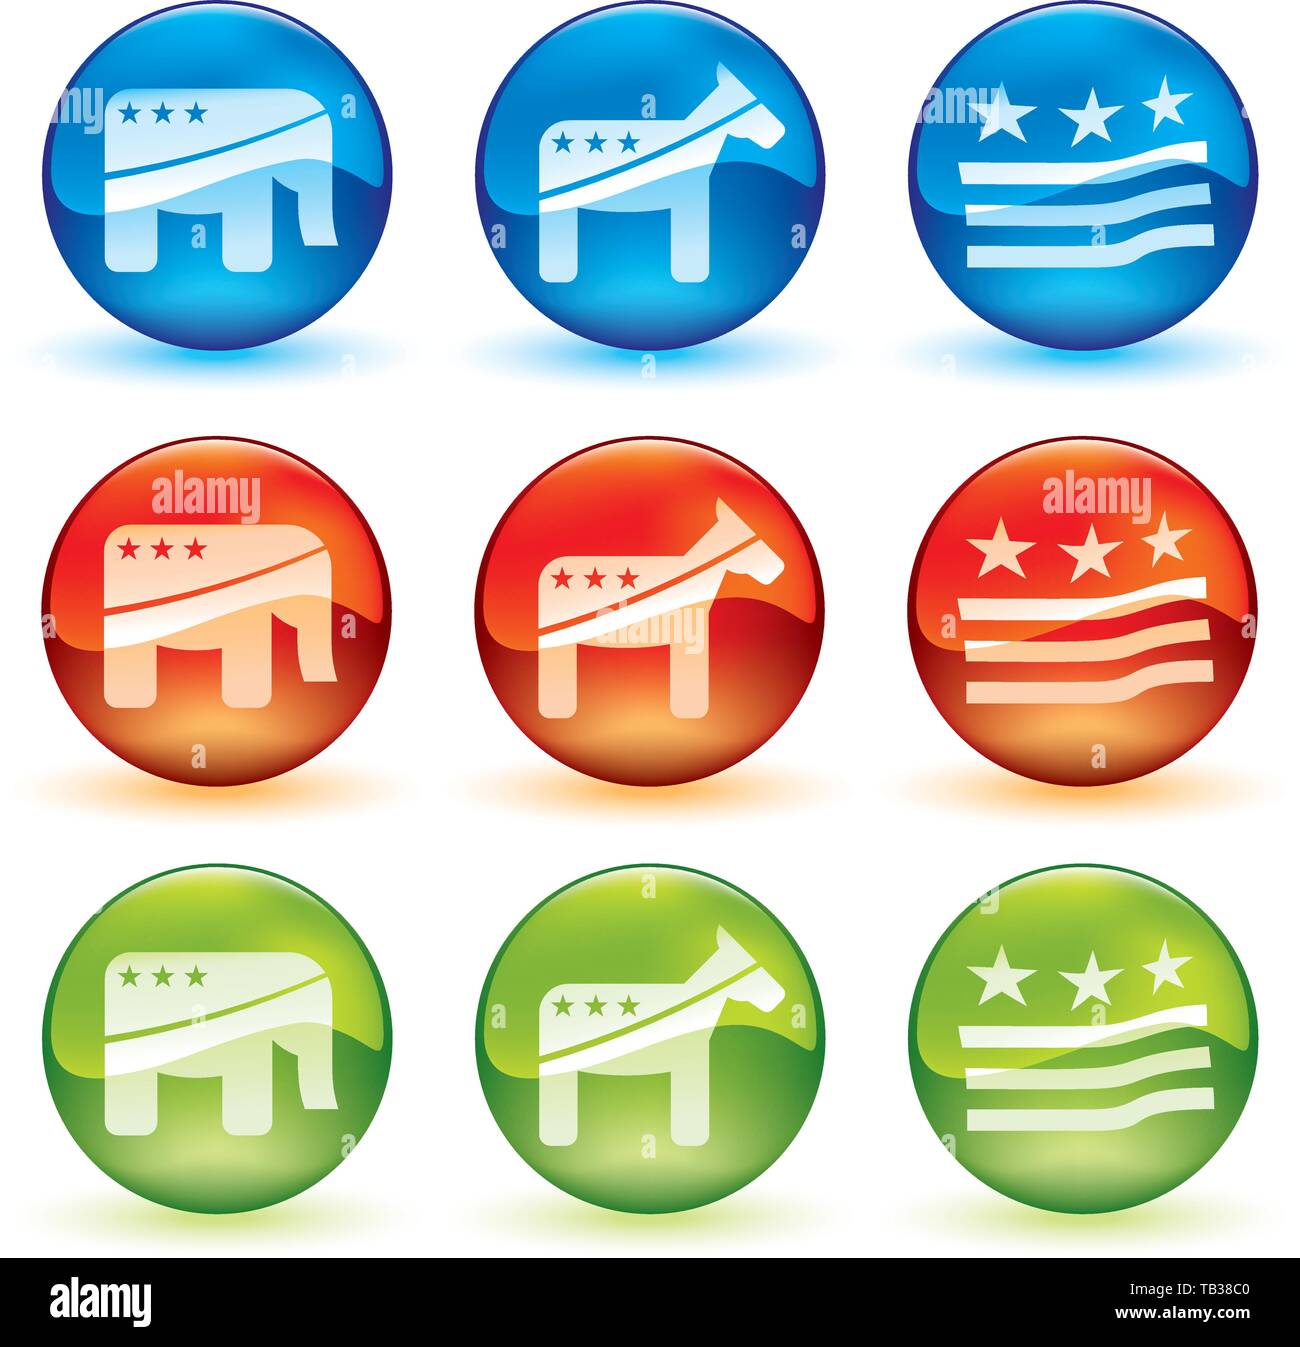 USA politics icons over round and shiny buttons. Stock Vector